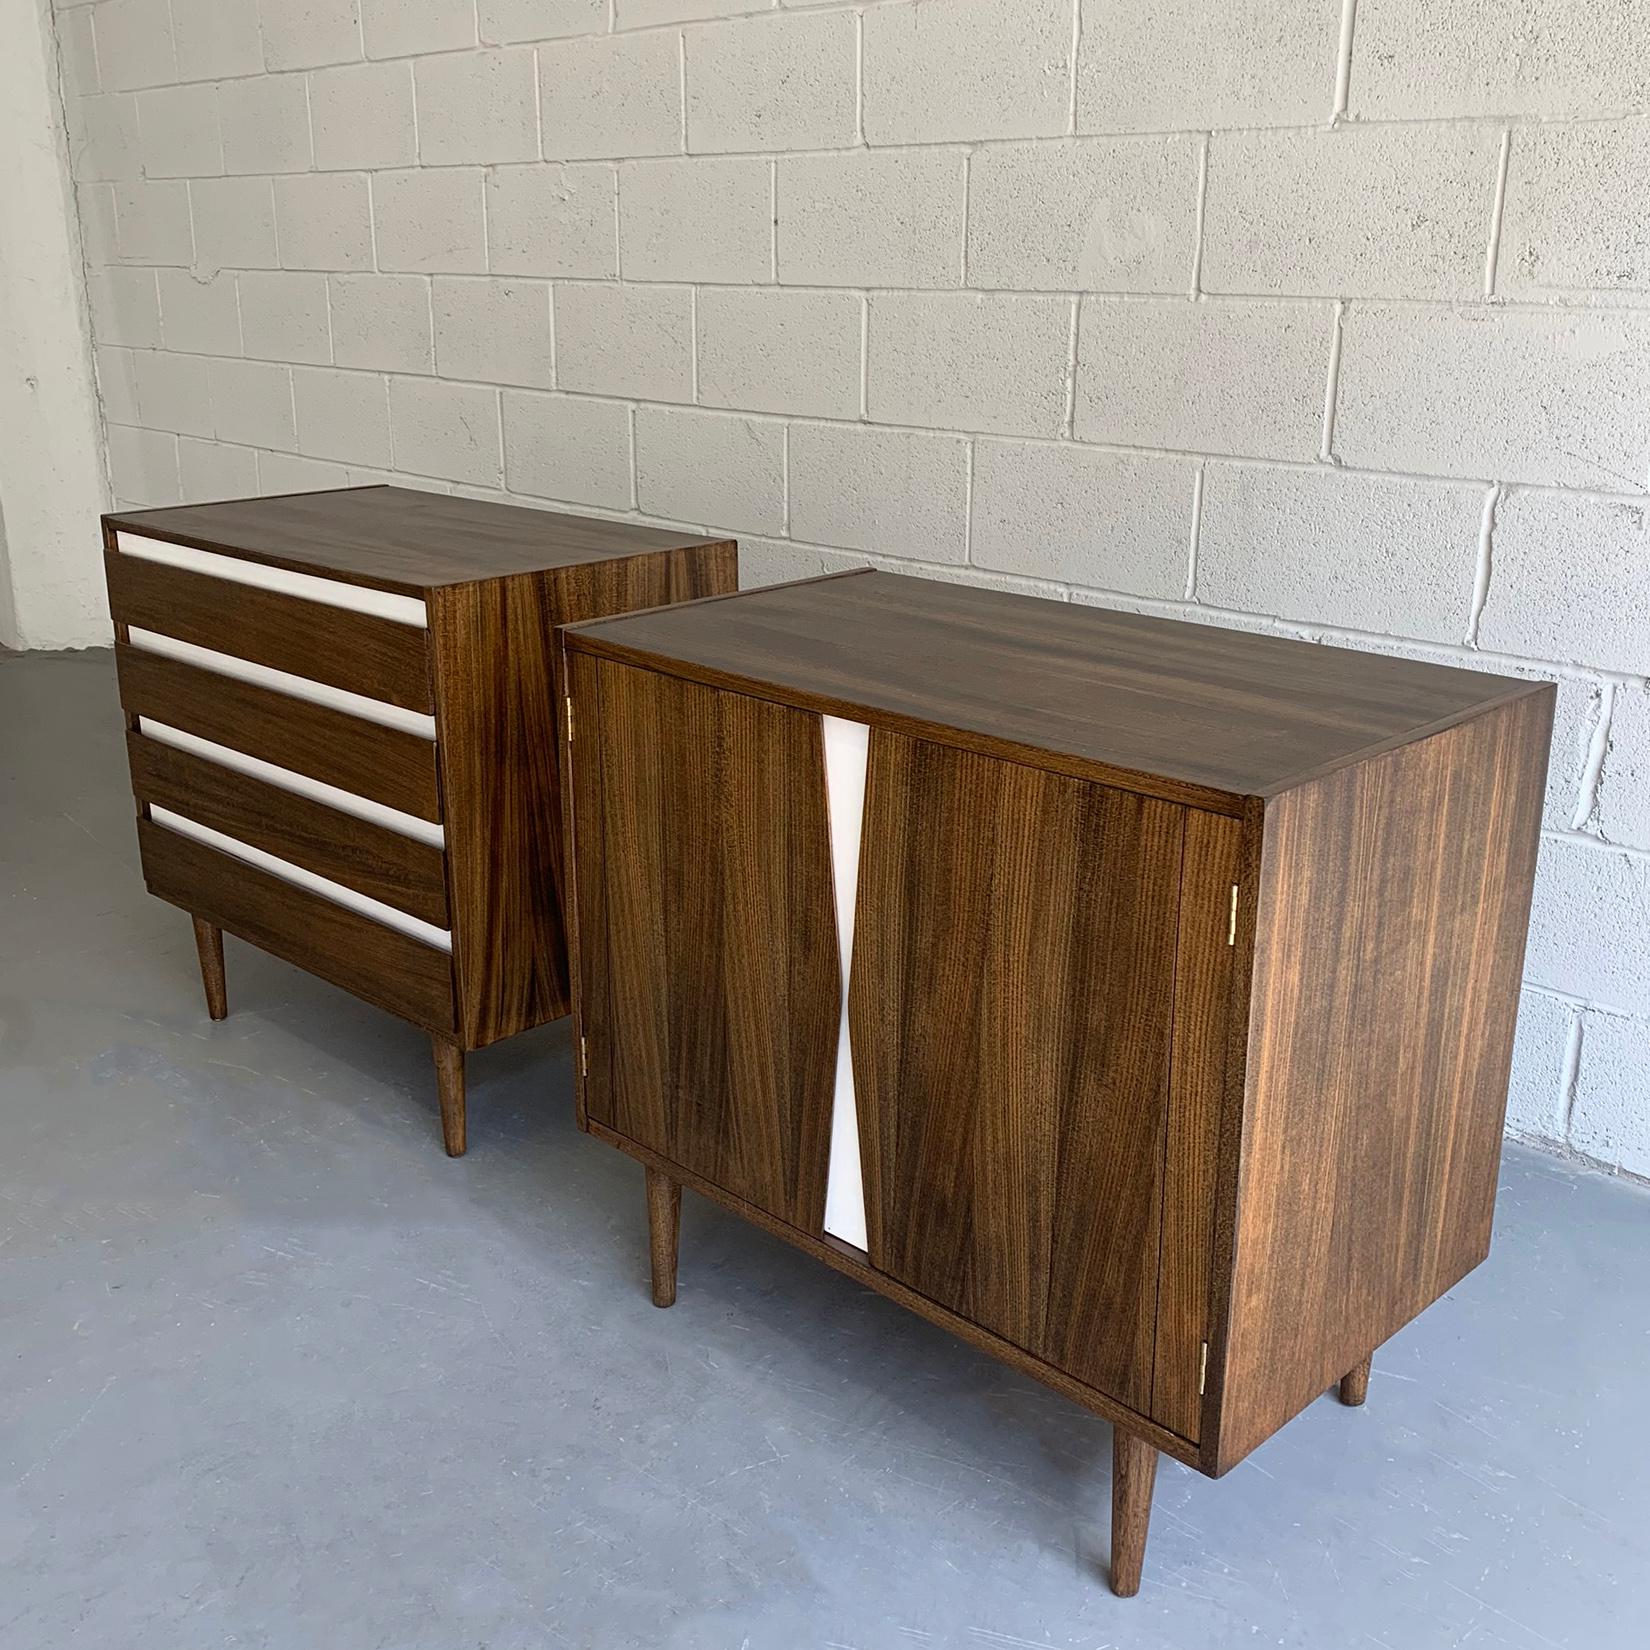 Pair of Mid-Century Modern Dresser Credenza Cabinets by American of Martinsville 2